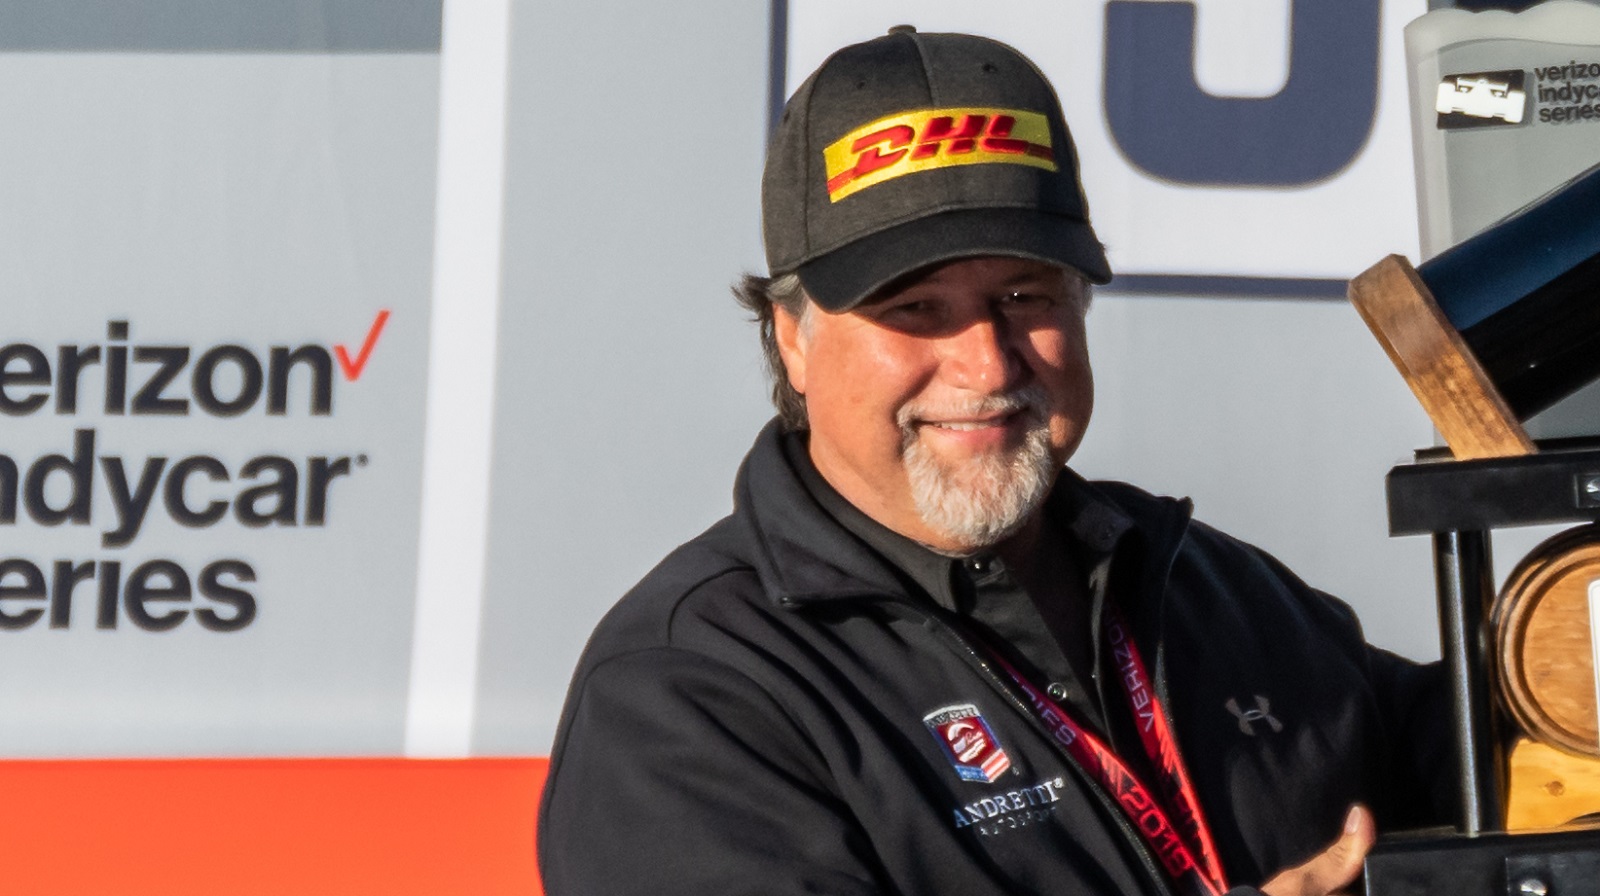 Michael Andretti accepts the race trophy at the IndyCar Grand Prix of Sonoma on Sept. 16, 2018.